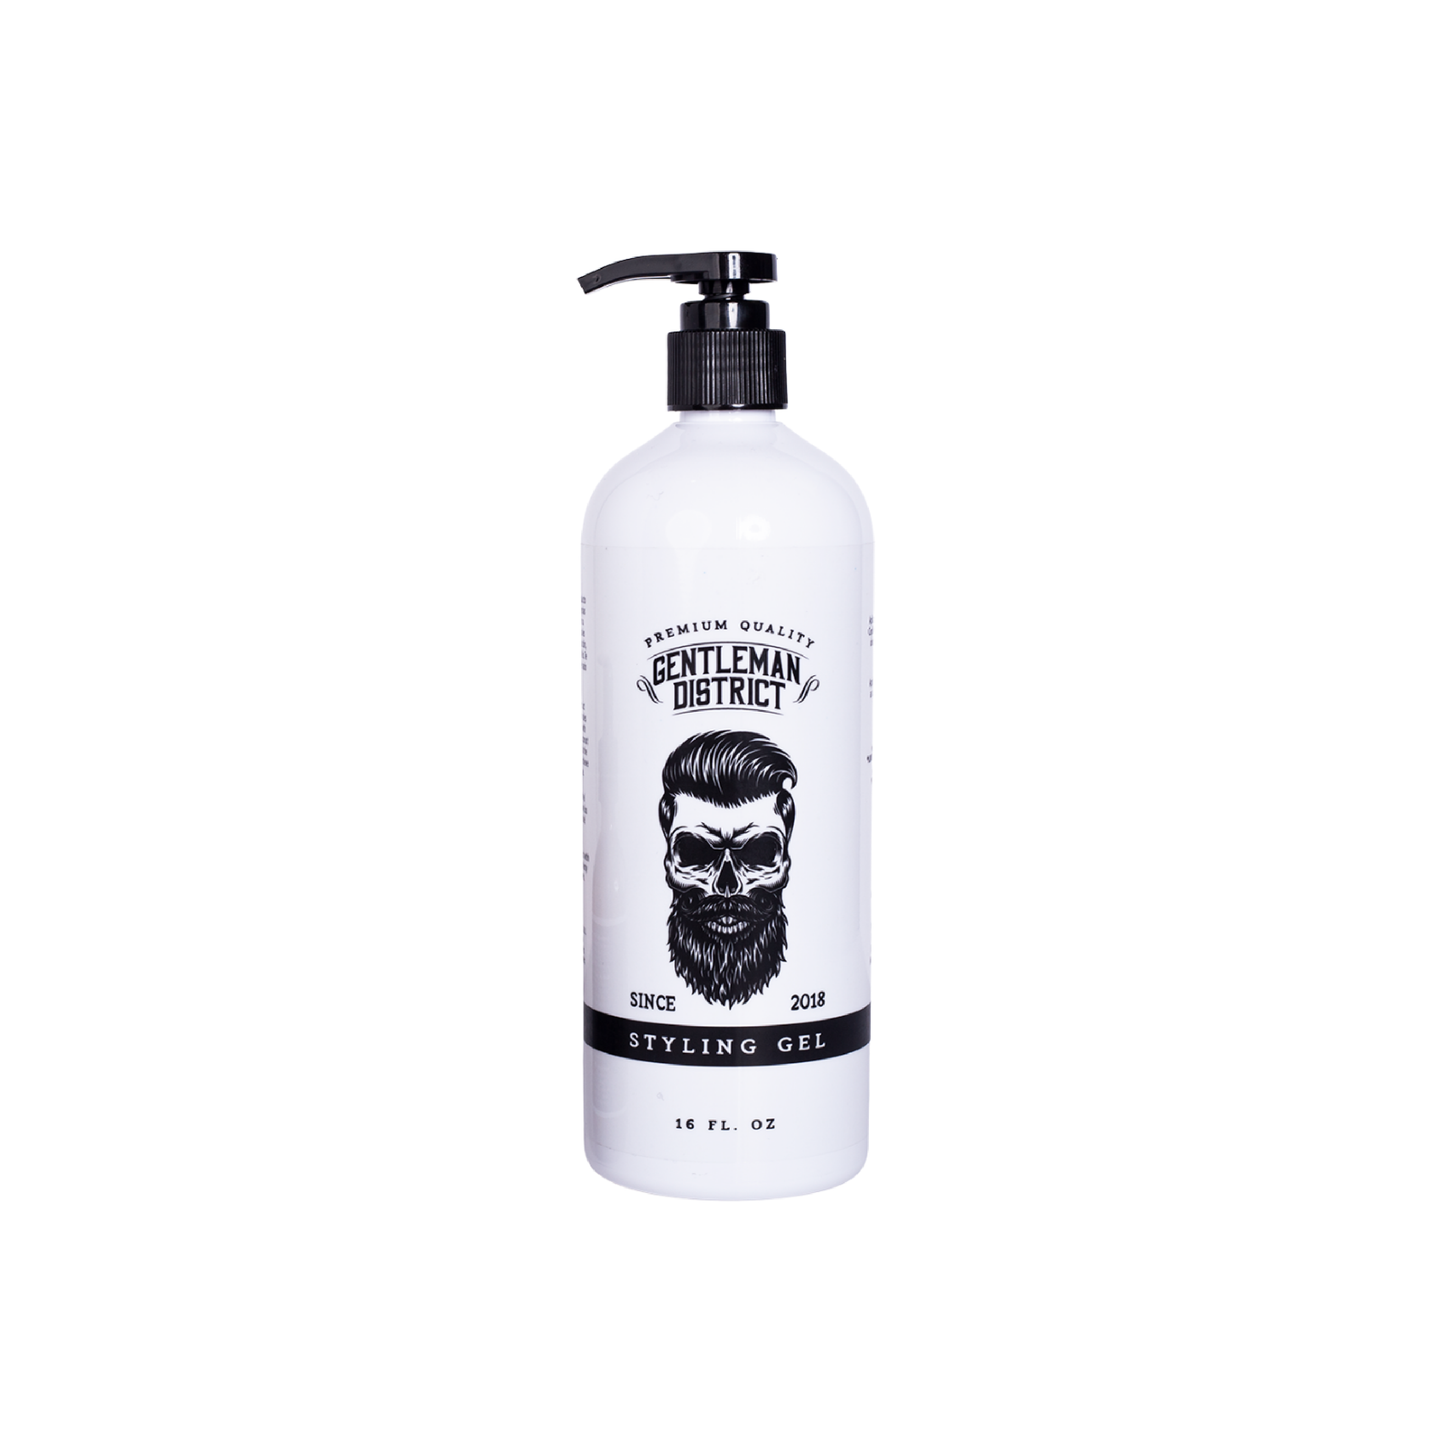 Gentleman District Styling Gel 16 oz. | Aloe Vera and Coconut | Hydration and softness | Leaves no residue